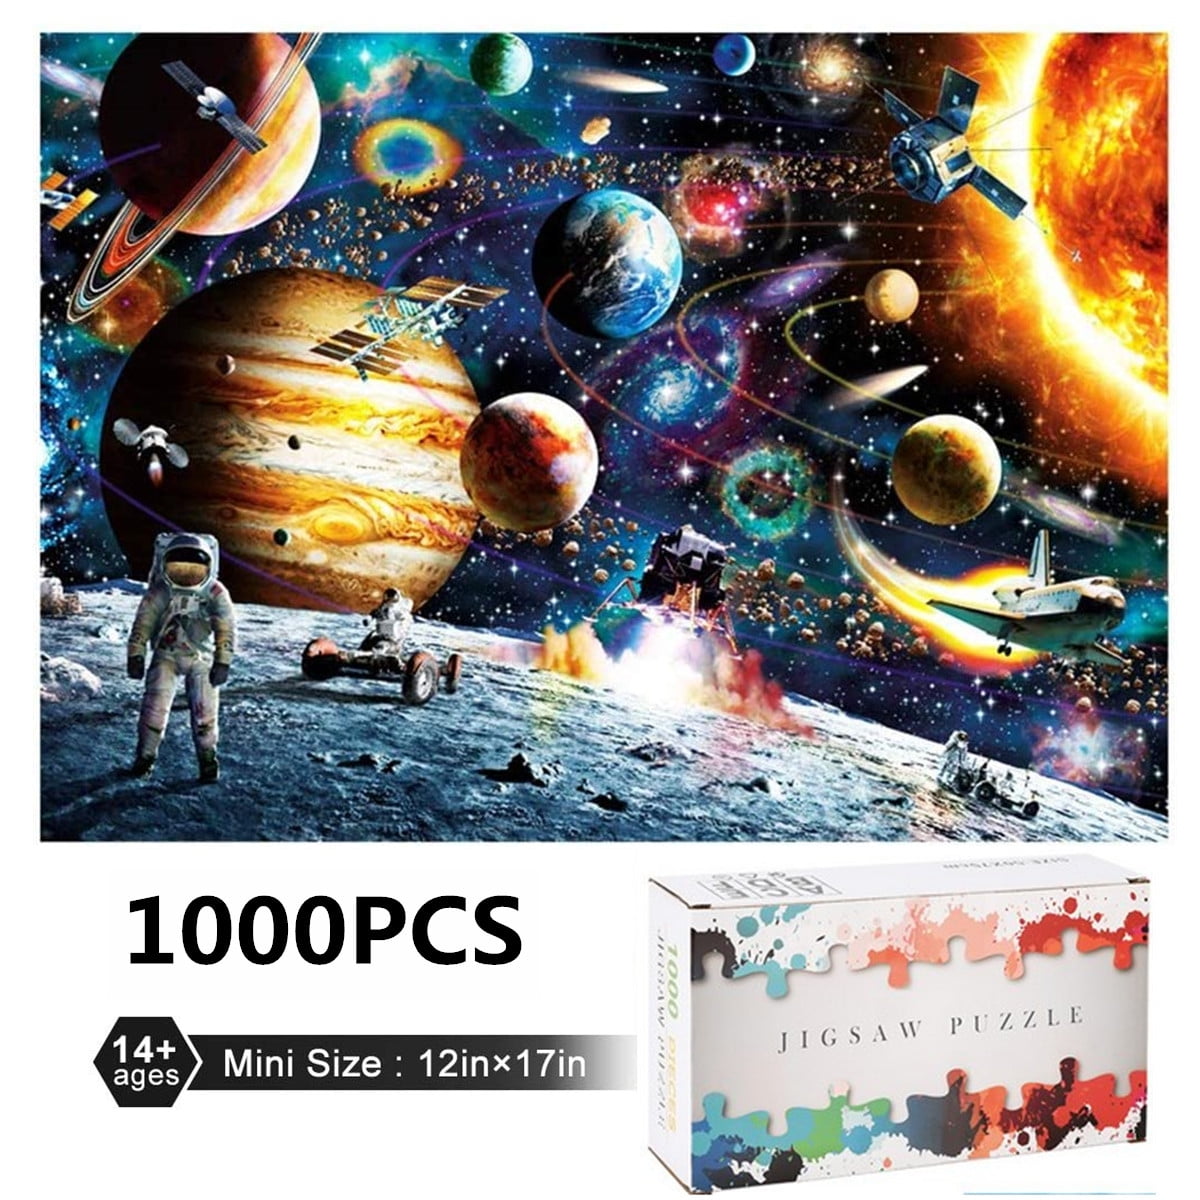 1000 Piece Jigsaw Puzzles Adult Kids Educational Puzzle Toy Gift Brand DIY